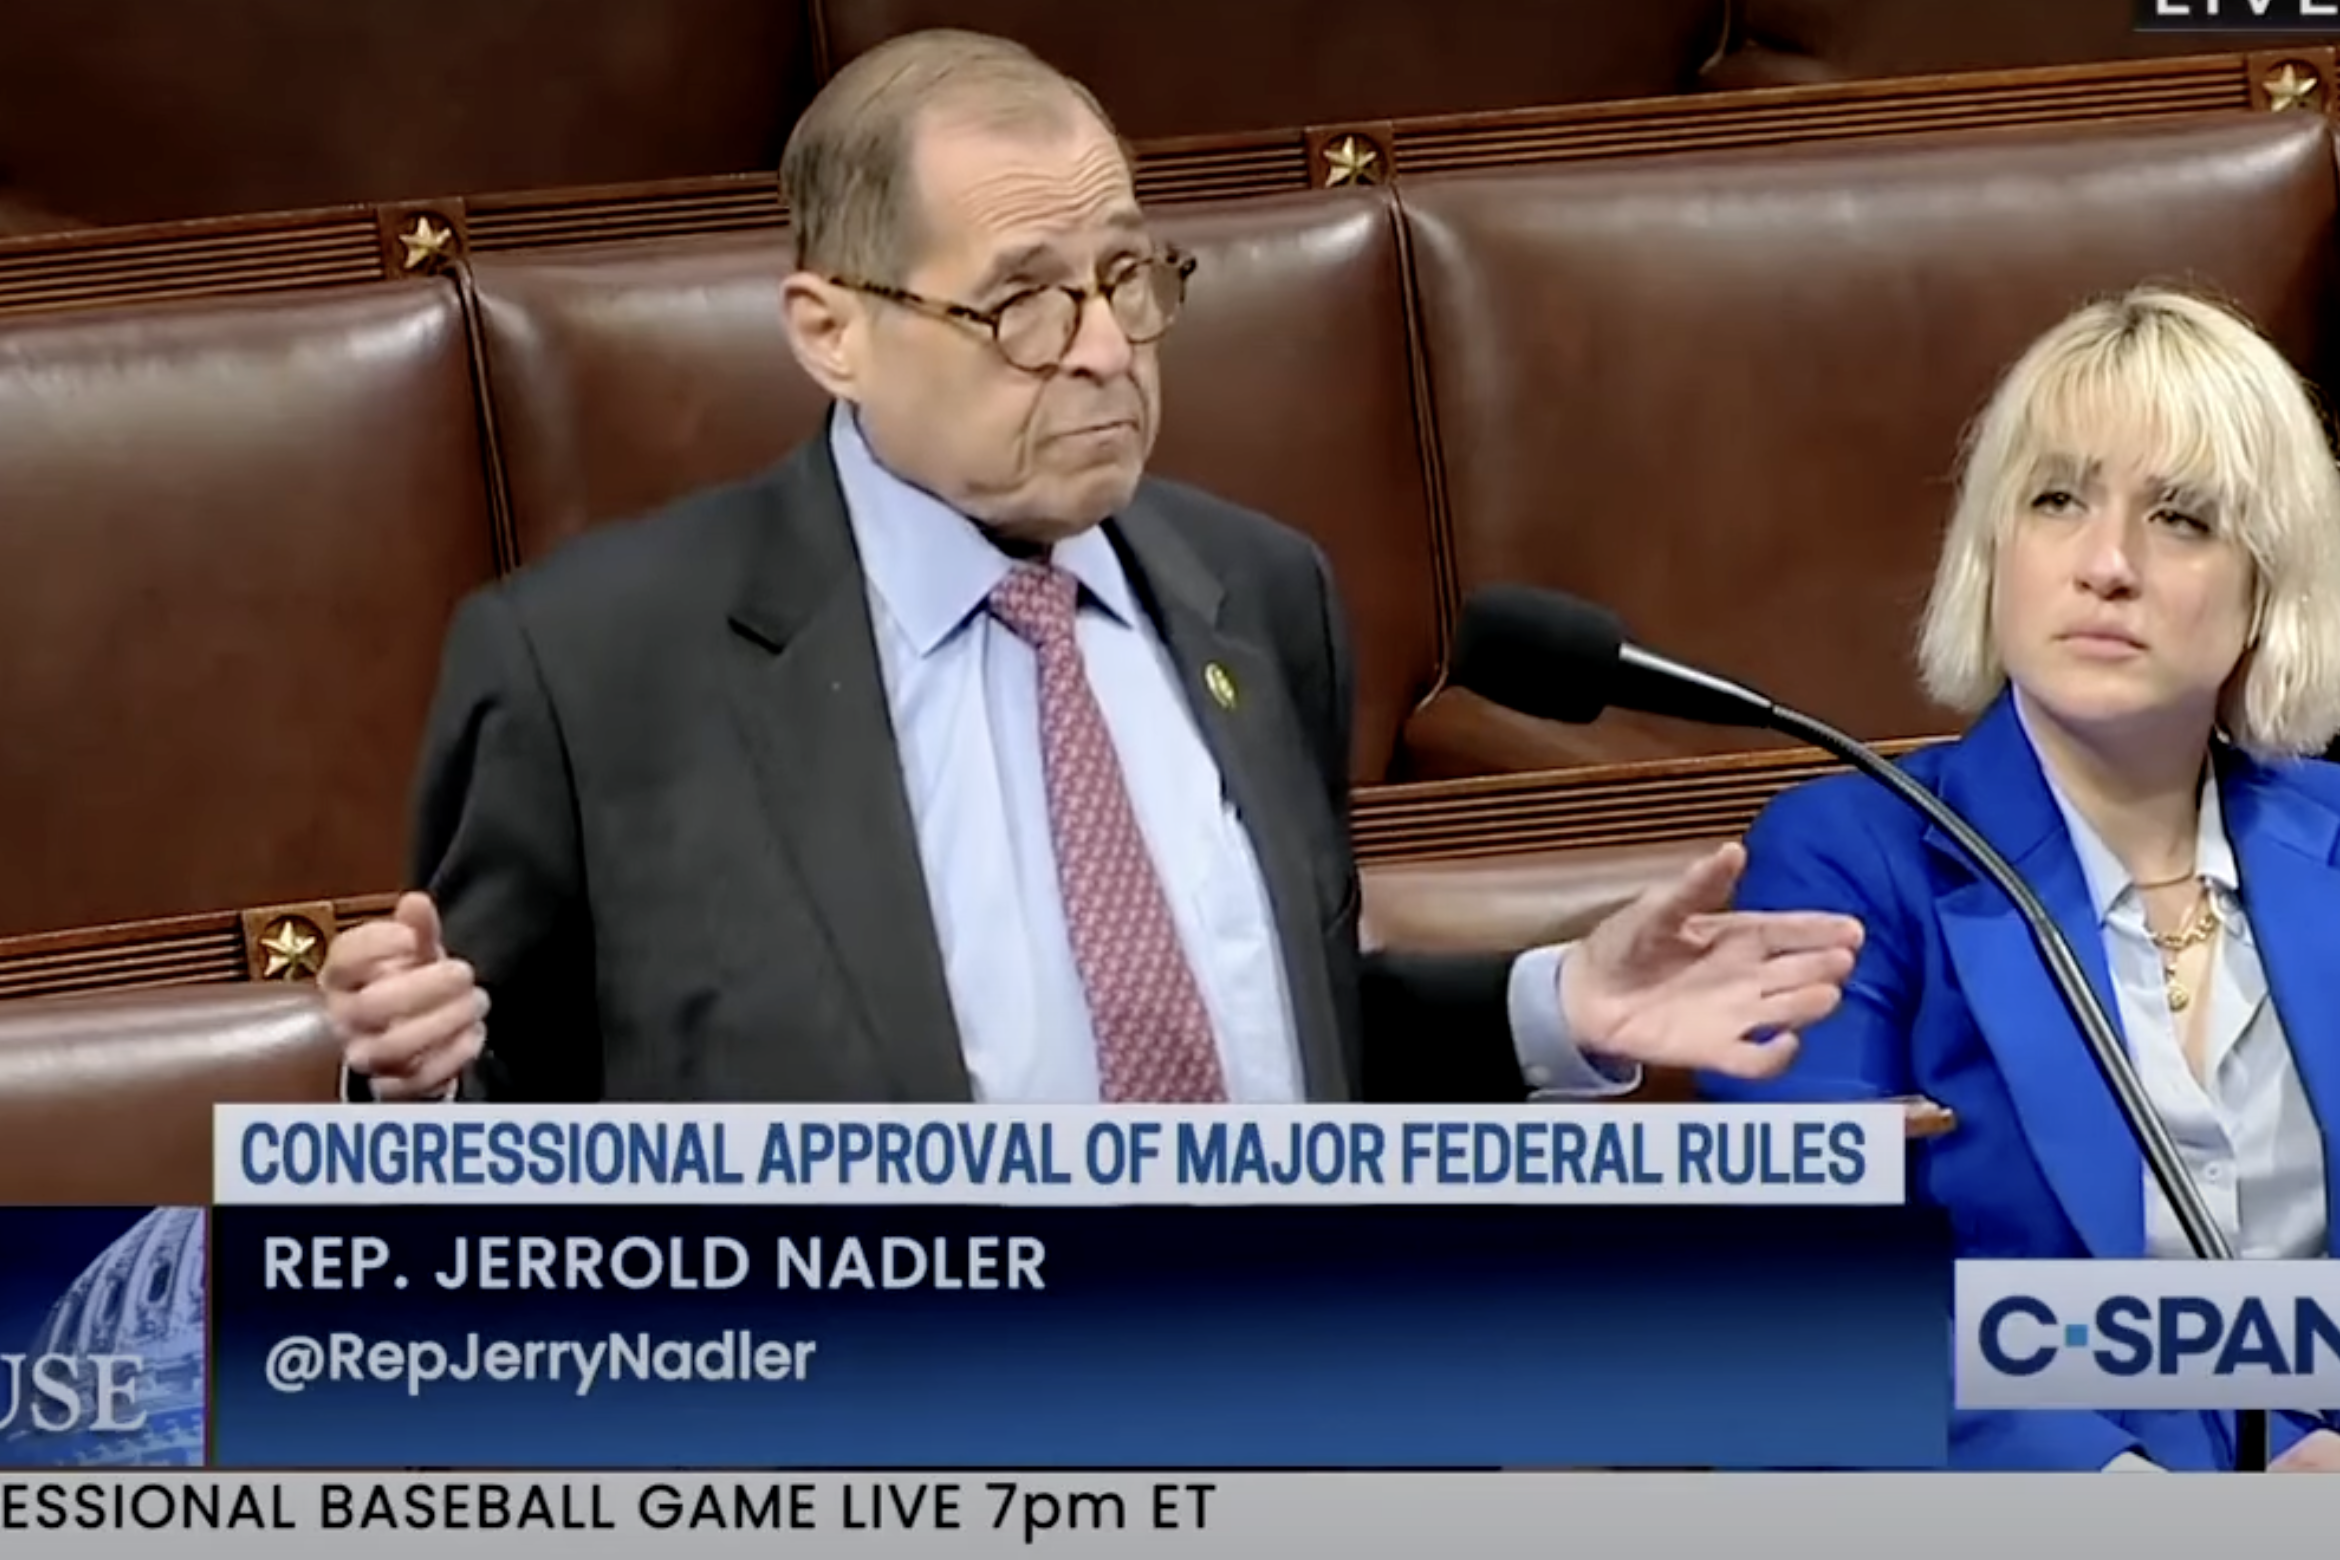 During a speech on the House floor, Representative Jerry Nadler (D., N.Y.) expressed his backing for mask mandates for children under the age of two. Nadler argued that parents should have made it mandatory for their young children to wear masks.